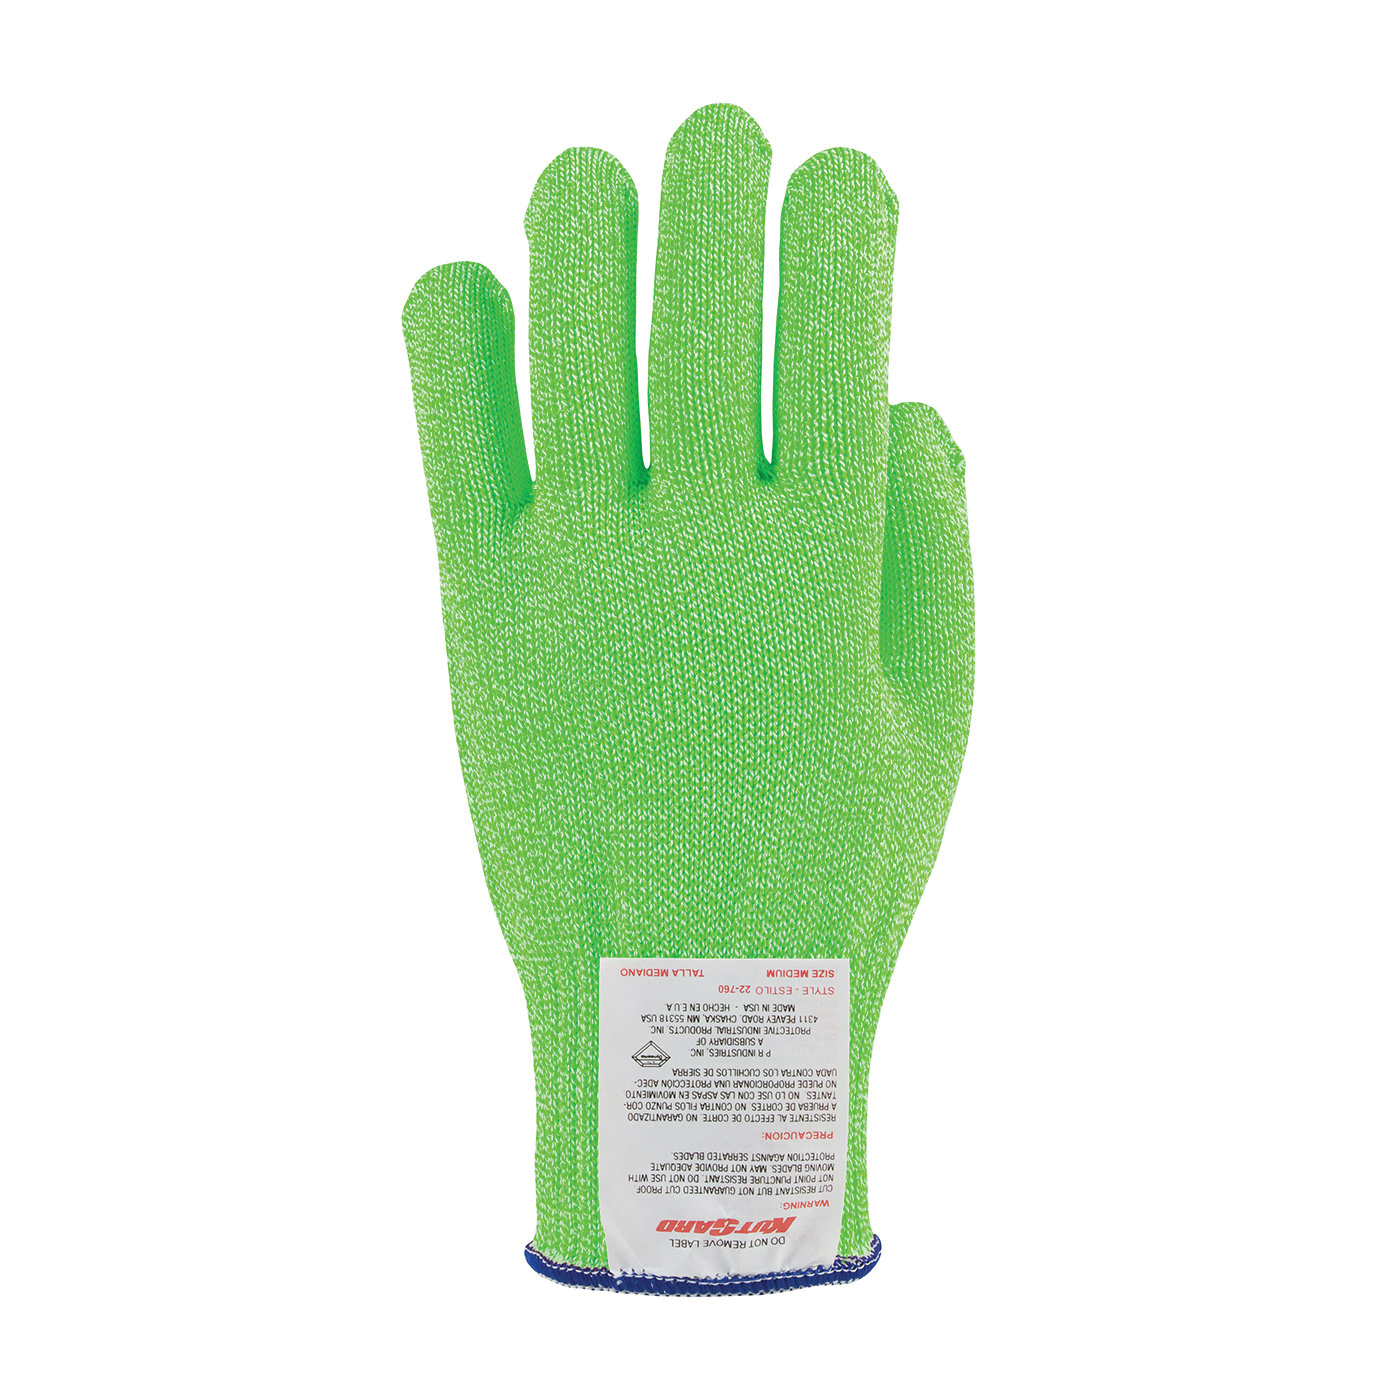 PIP® Kut-Gard® 22-760BG/L Anti-Microbial Medium Weight Unisex Cut Resistant Gloves, L, Uncoated Coating, Dyneema®/Polyester/Silica/Stainless Steel/Synthetic Fiber, Elastic/Knit Wrist Cuff, Resists: Cut, Shrink and Slash, ANSI Cut-Resistance Level: A7